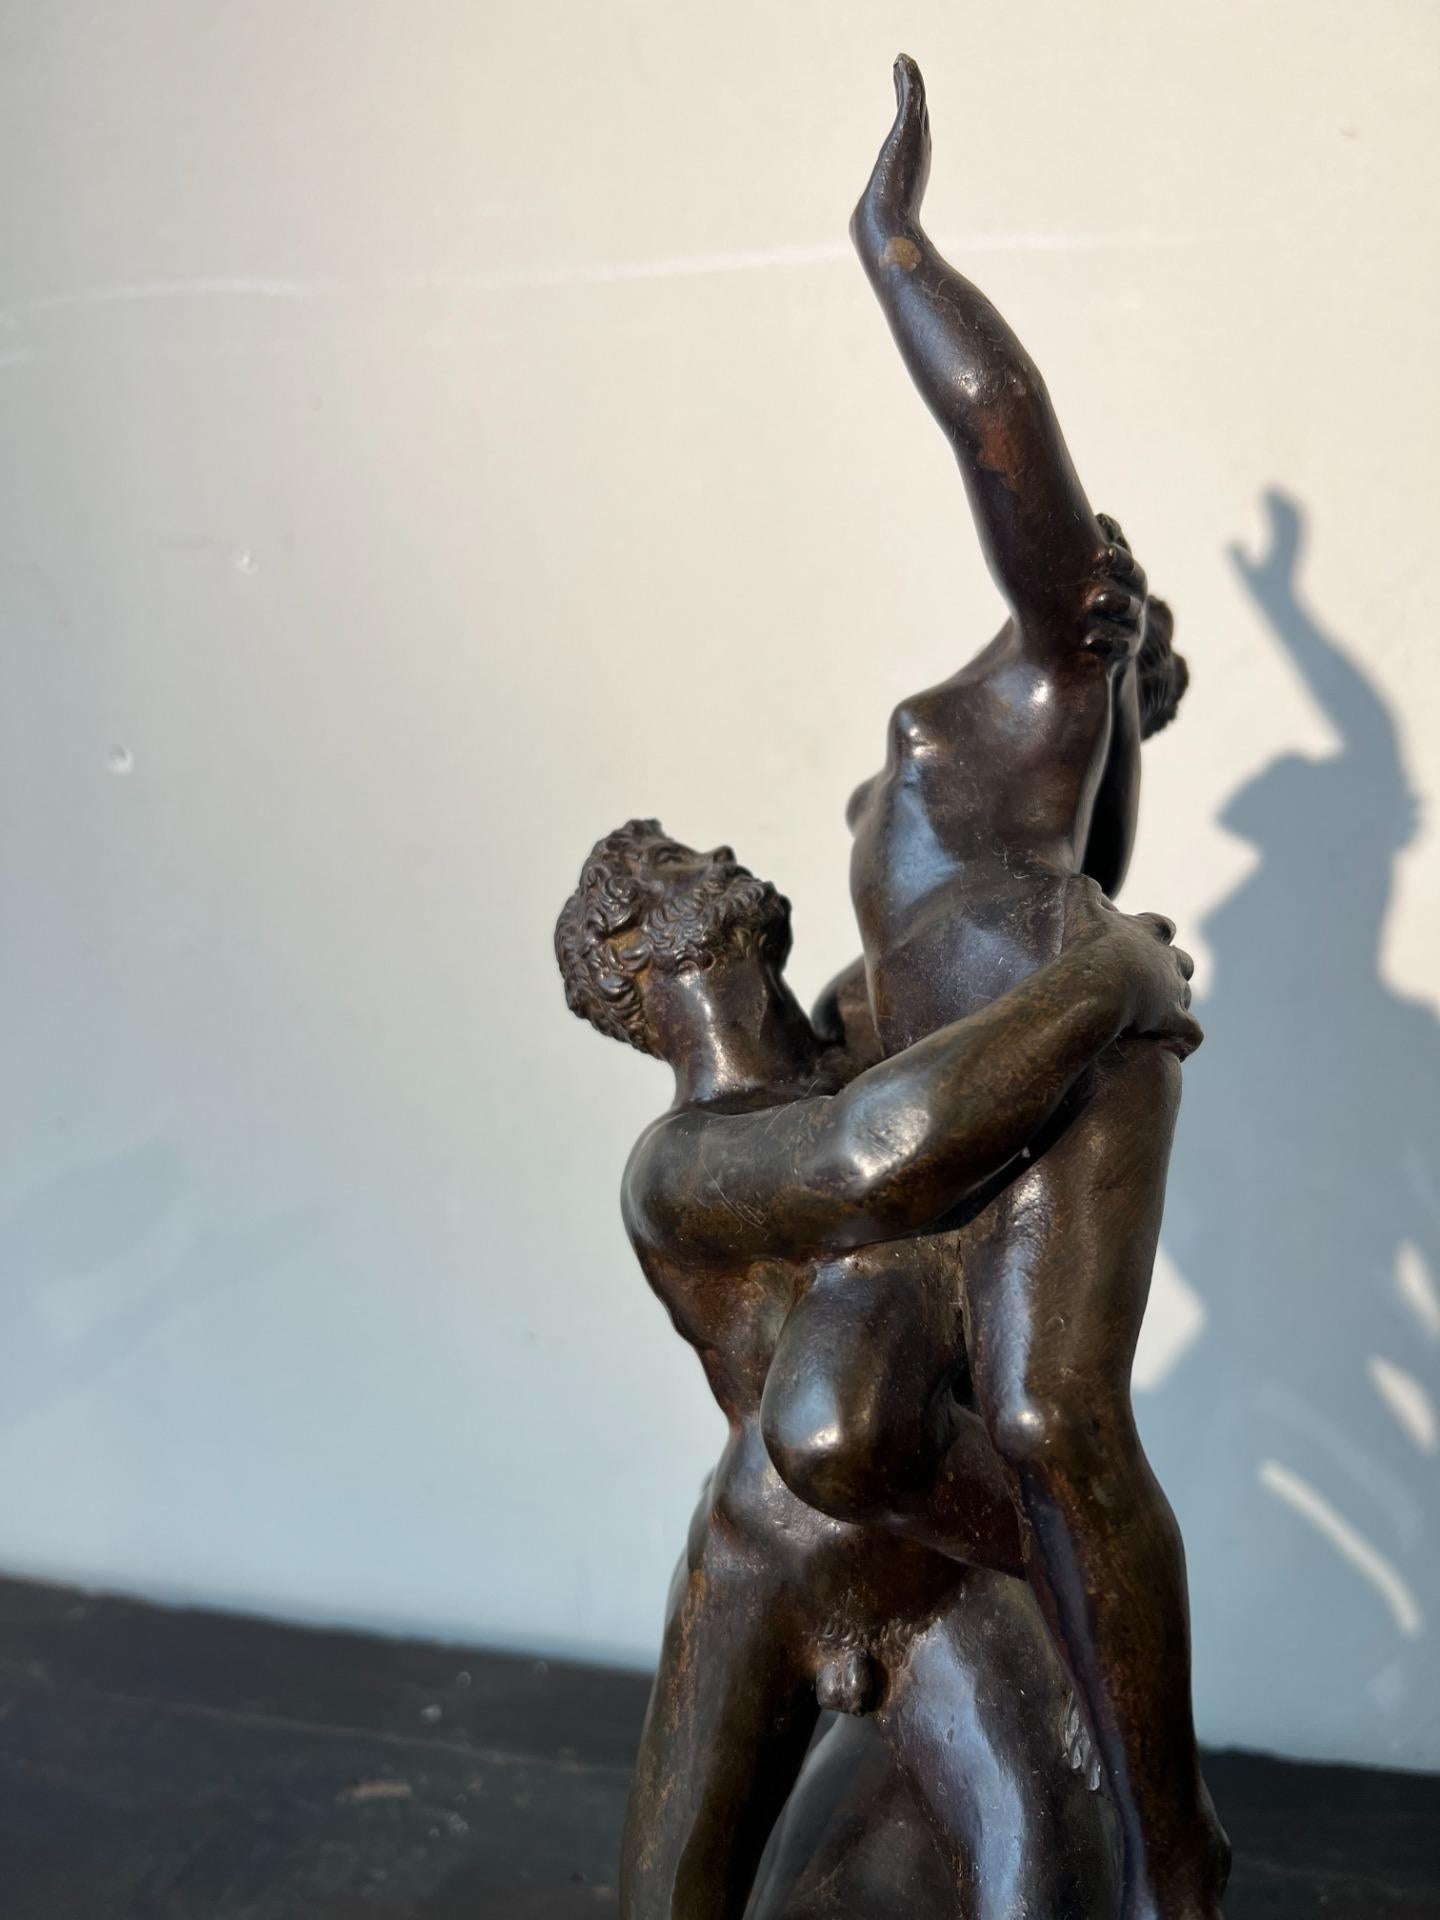 Splendid bronze sculptural group depicting the rape of the Sabine women, made with the ancient lost wax technique. The drama of the scene is rendered with great mastery: in the center, a man holds a Sabina woman firmly in his hands, who desperately